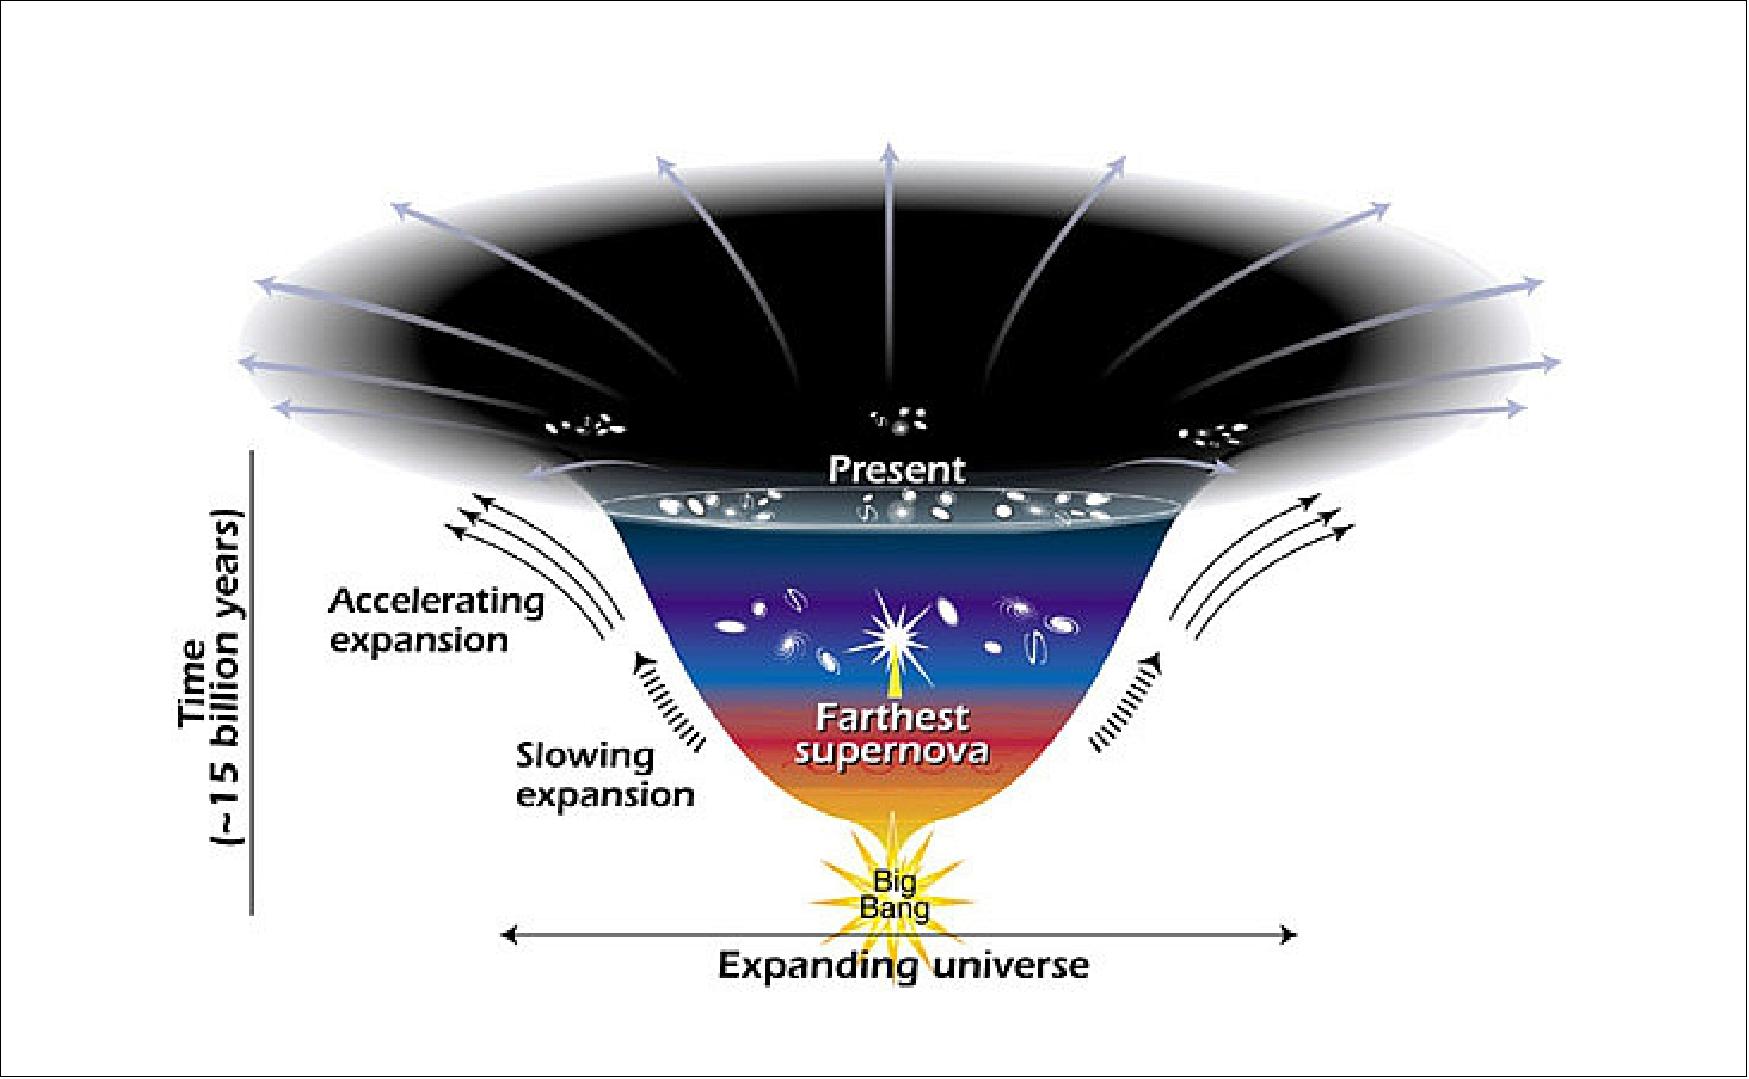 Figure 4: Changes in the Rate of Expansion over Time: This diagram reveals changes in the rate of expansion since the universe's birth 15 billion years ago. The more shallow the curve, the faster the rate of expansion. The curve changes noticeably about 7.5 billion years ago, when objects in the universe began flying apart as a faster rate. Astronomers theorize that the faster expansion rate is due to a mysterious, dark force that is pulling galaxies apart (image credit: NASA/STScI/Ann Feild)